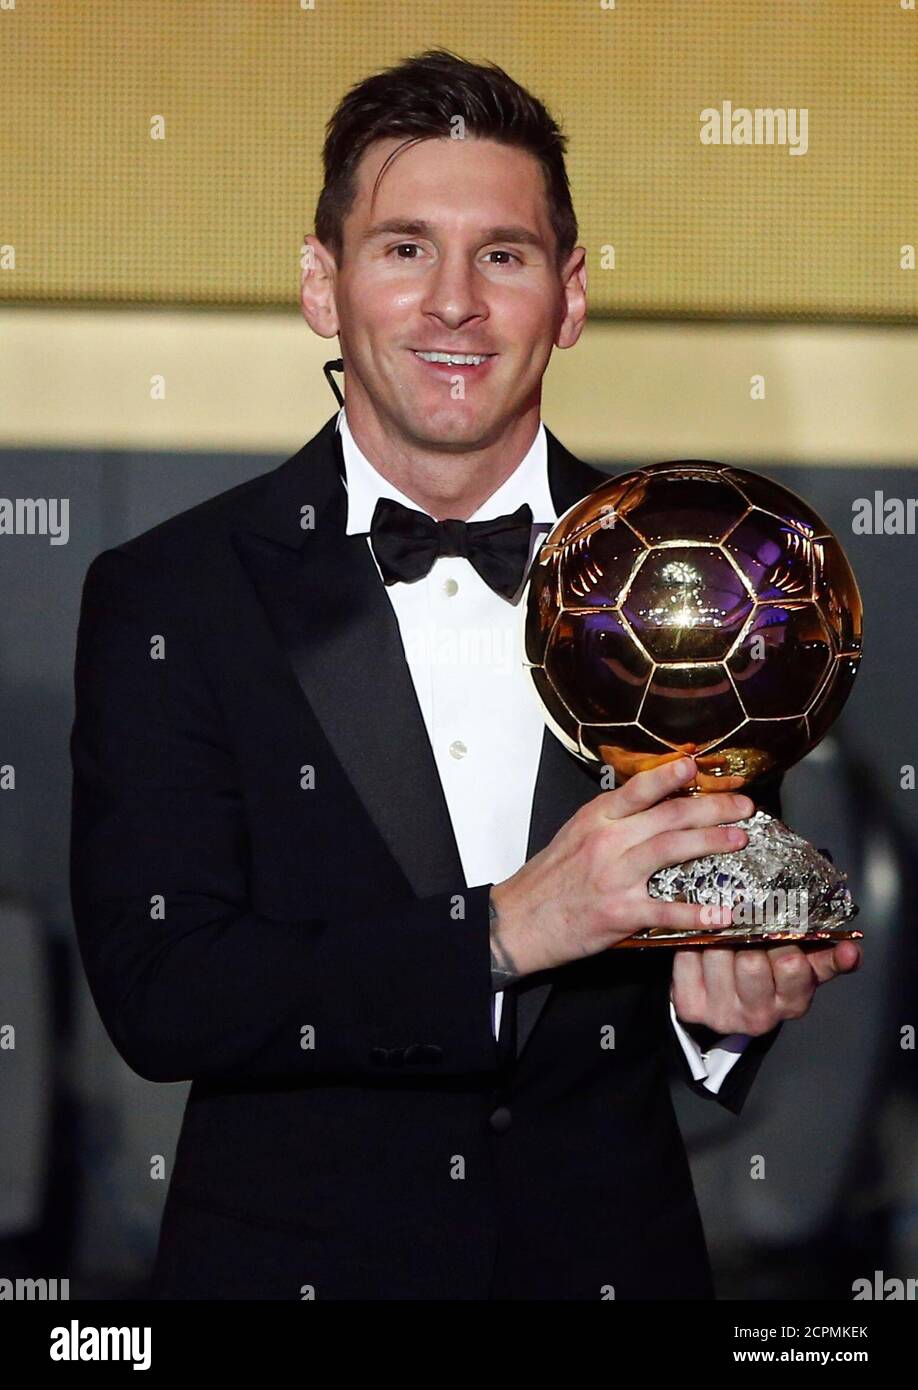 FC Barcelona's Lionel Messi of Argentina holds the World Player of the Year  award during the FIFA Ballon d'Or 2015 ceremony in Zurich, Switzerland,  January 11, 2016. REUTERS/Arnd Wiegmann Stock Photo - Alamy